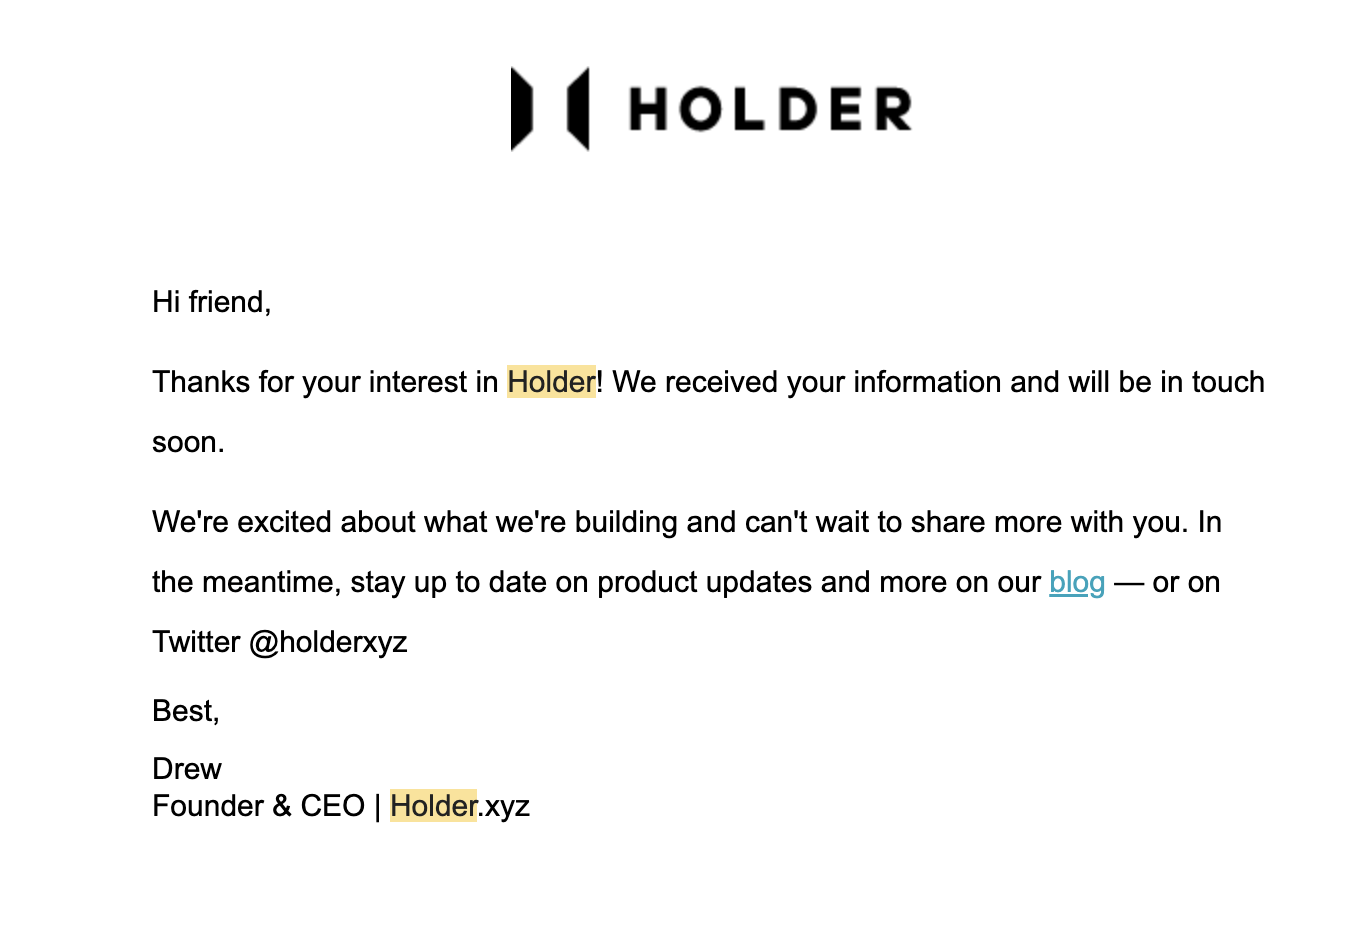 SaaS Waitlist Emails: Screenshot of Holder's email for waitlist members